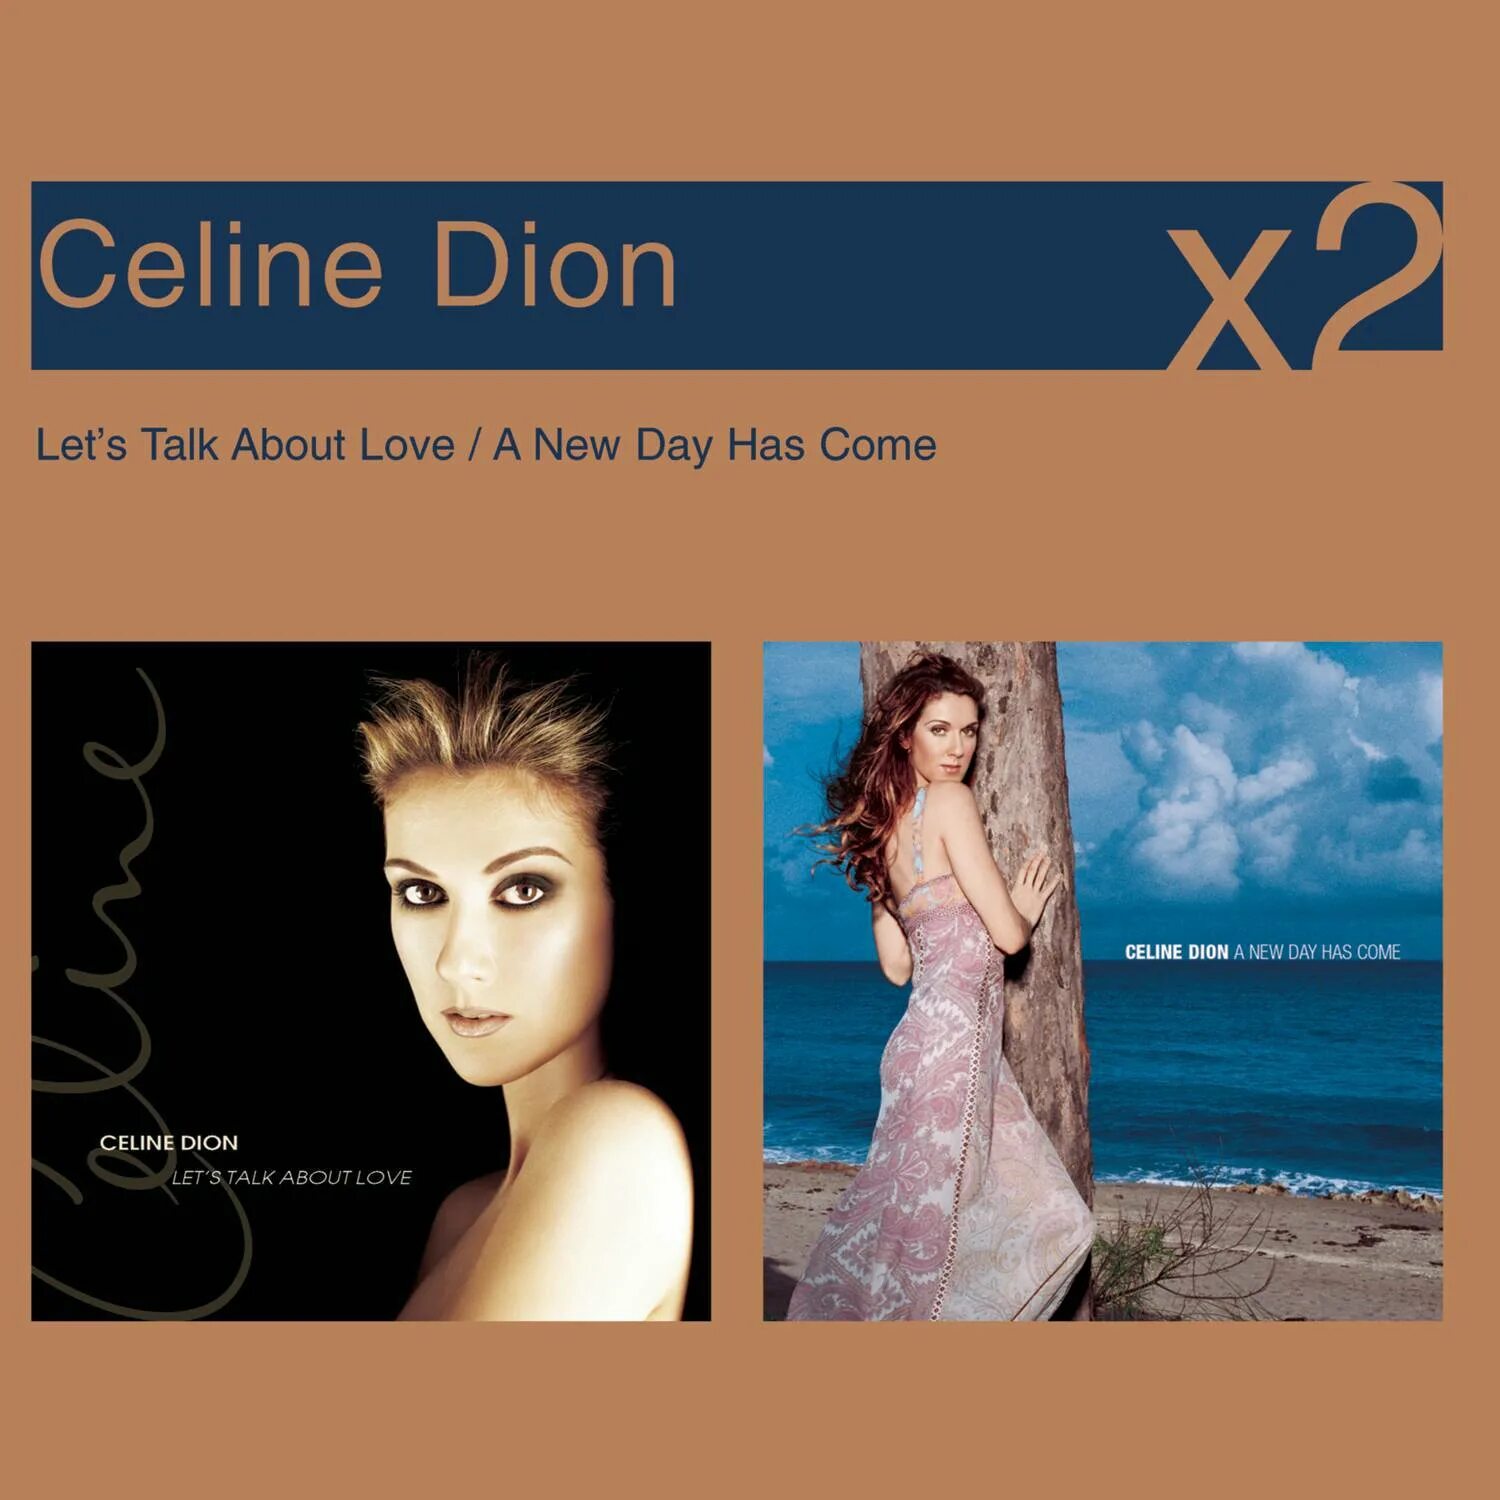 Celine dion a new day. Let’s talk about Love Селин Дион. A New Day has come Селин Дион. Селин Дион альбомы. Картинки Селин Дион альбомы.